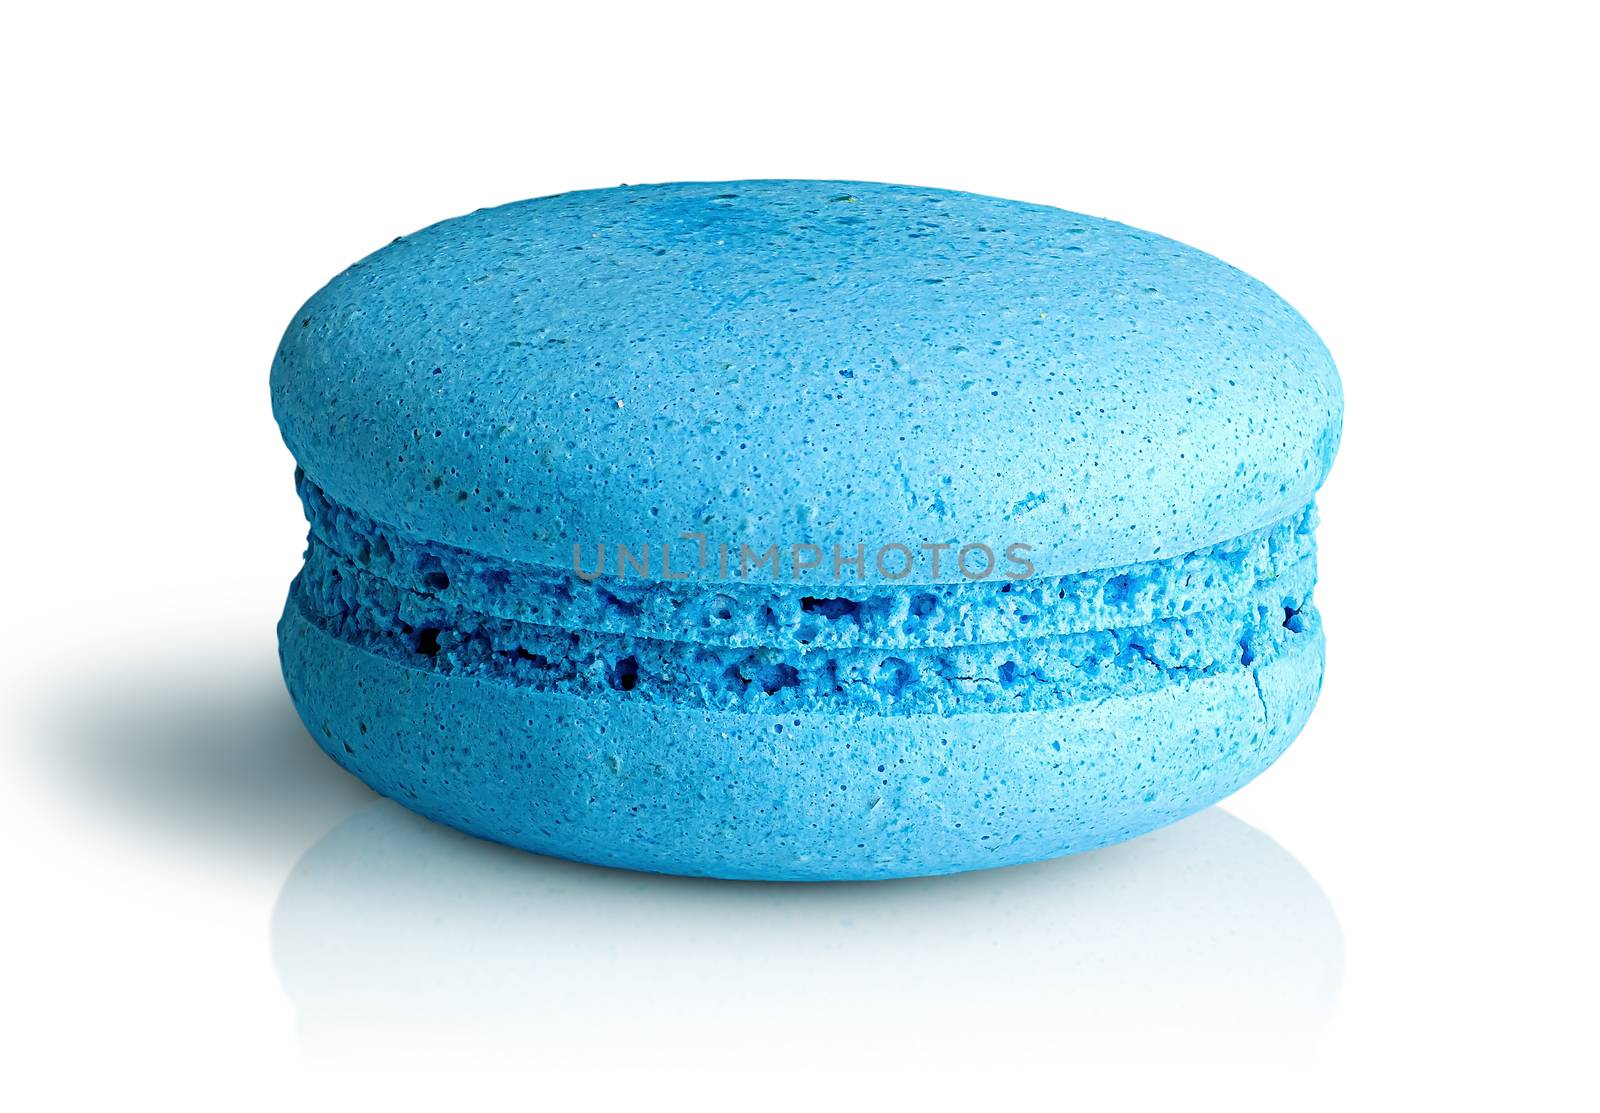 One blue macaroon front view on white background